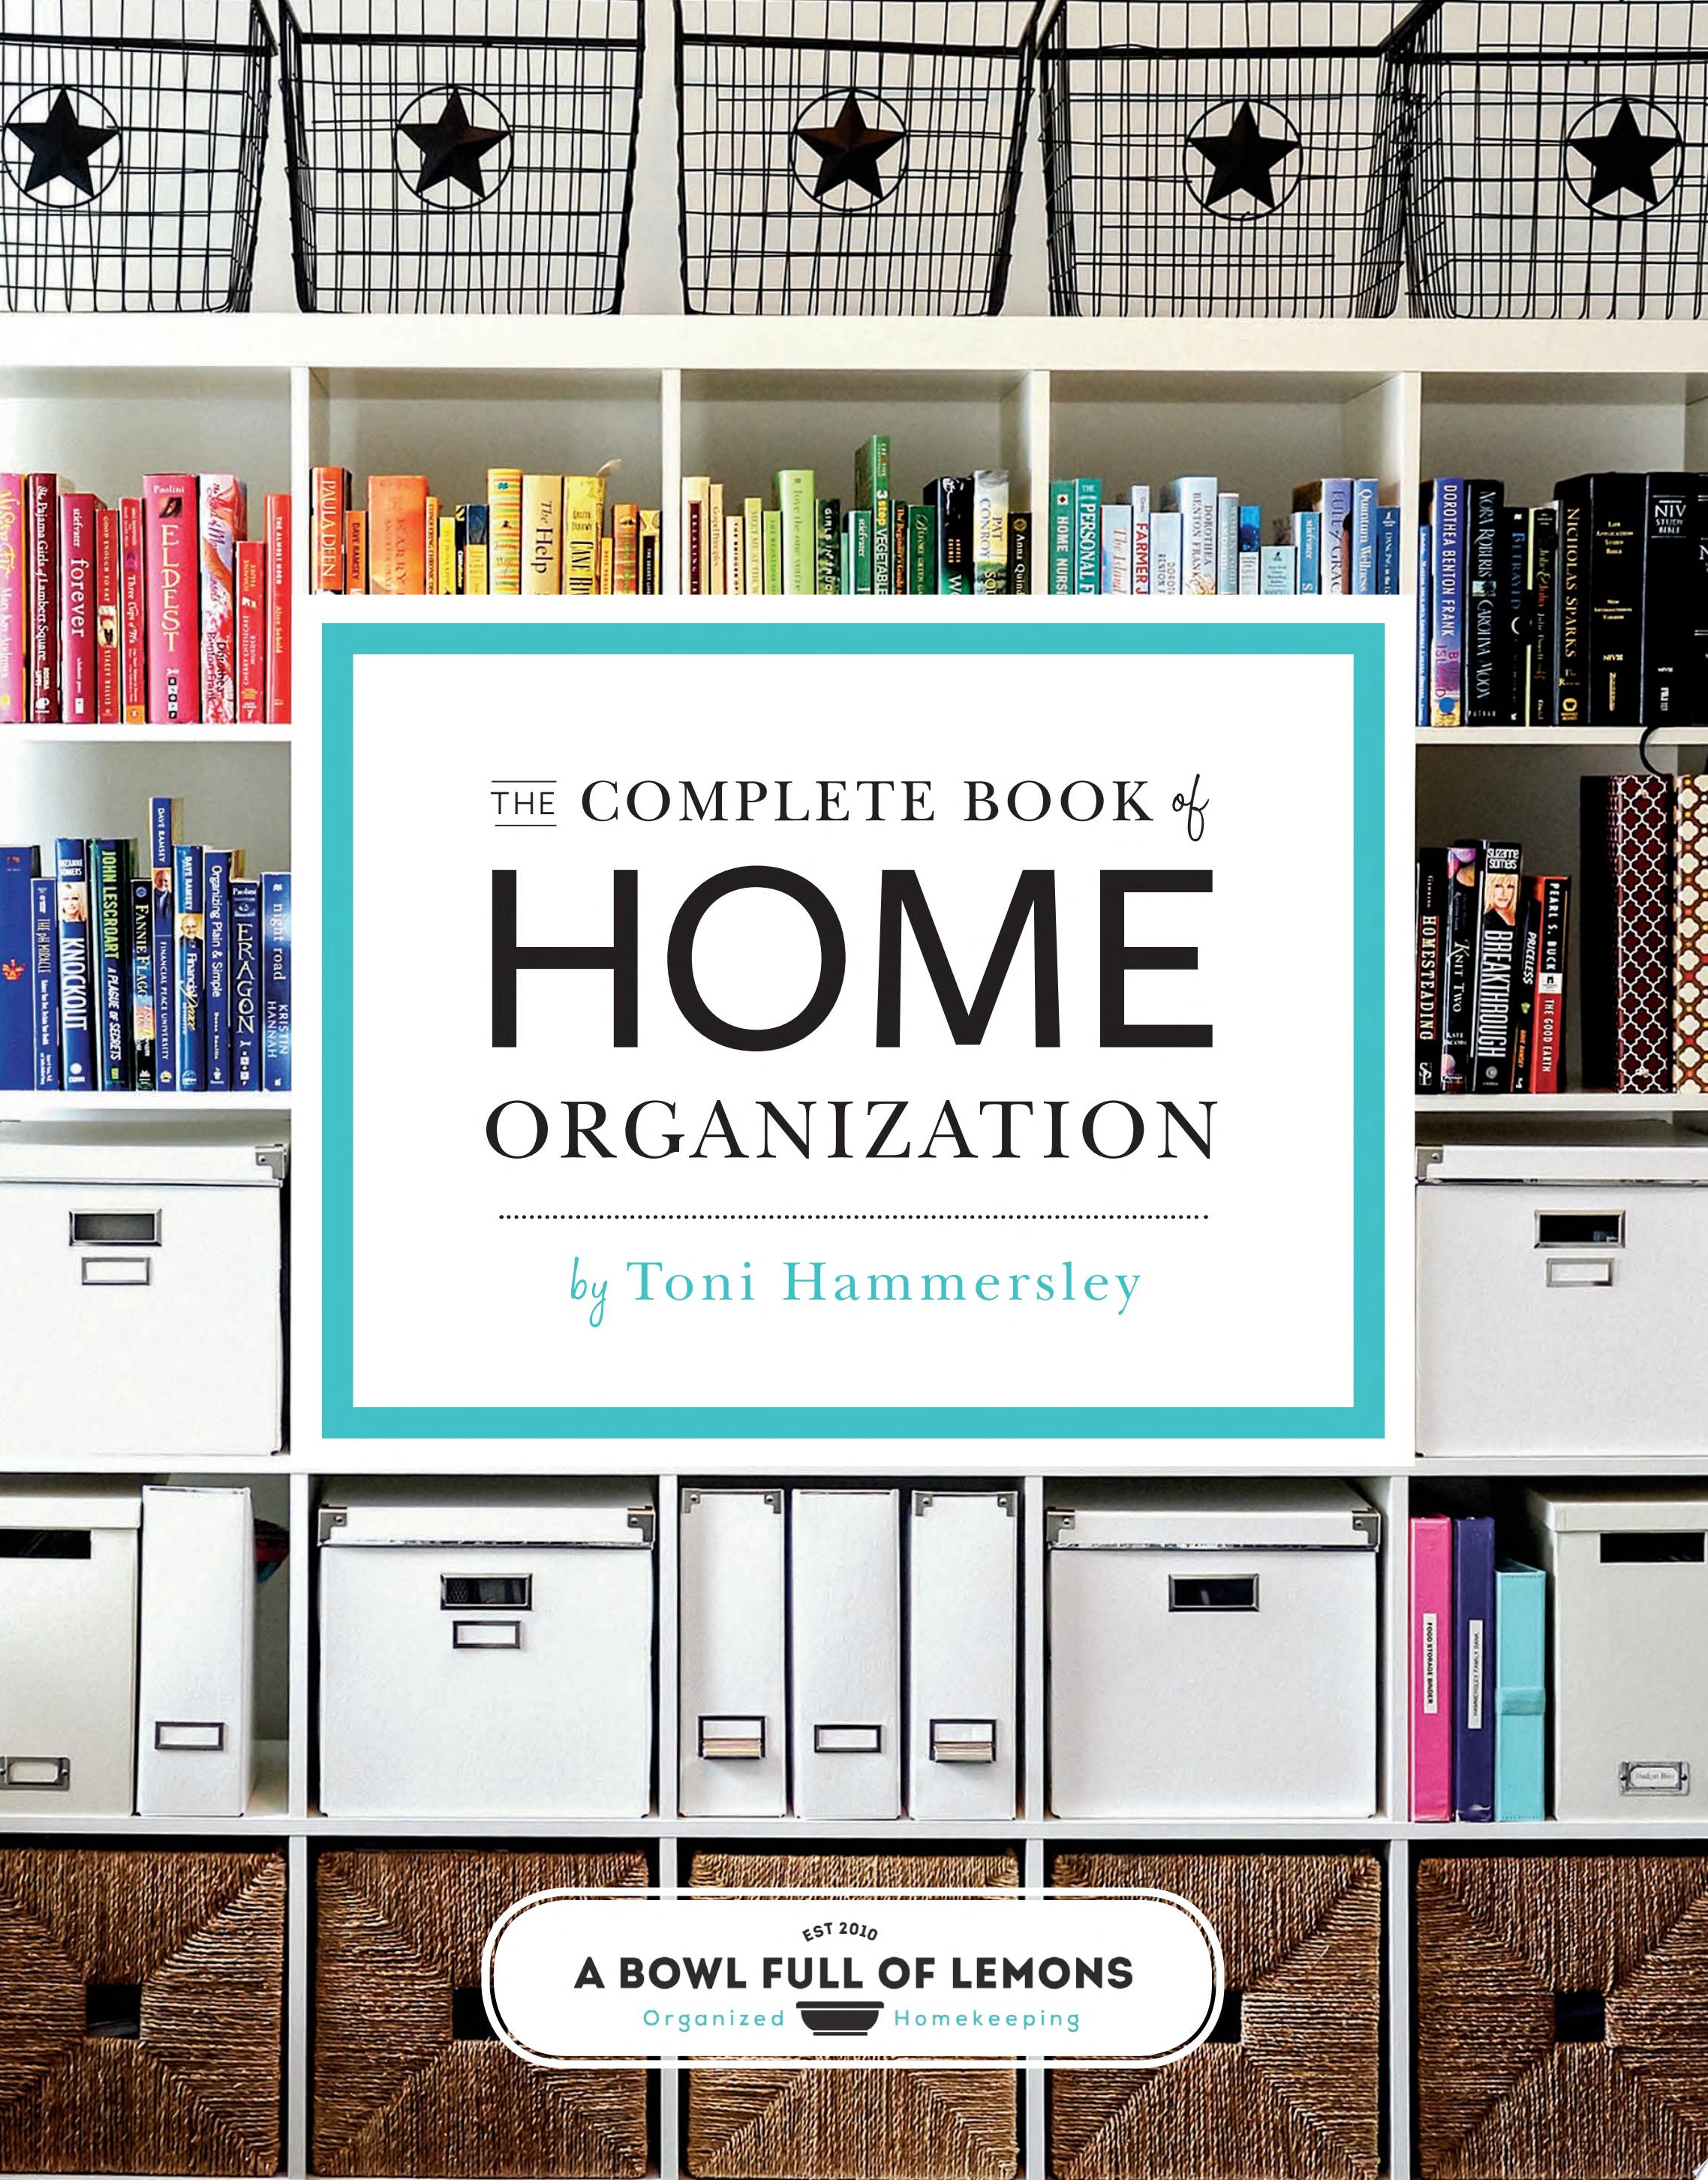 Image for "The Complete Book of Home Organization"